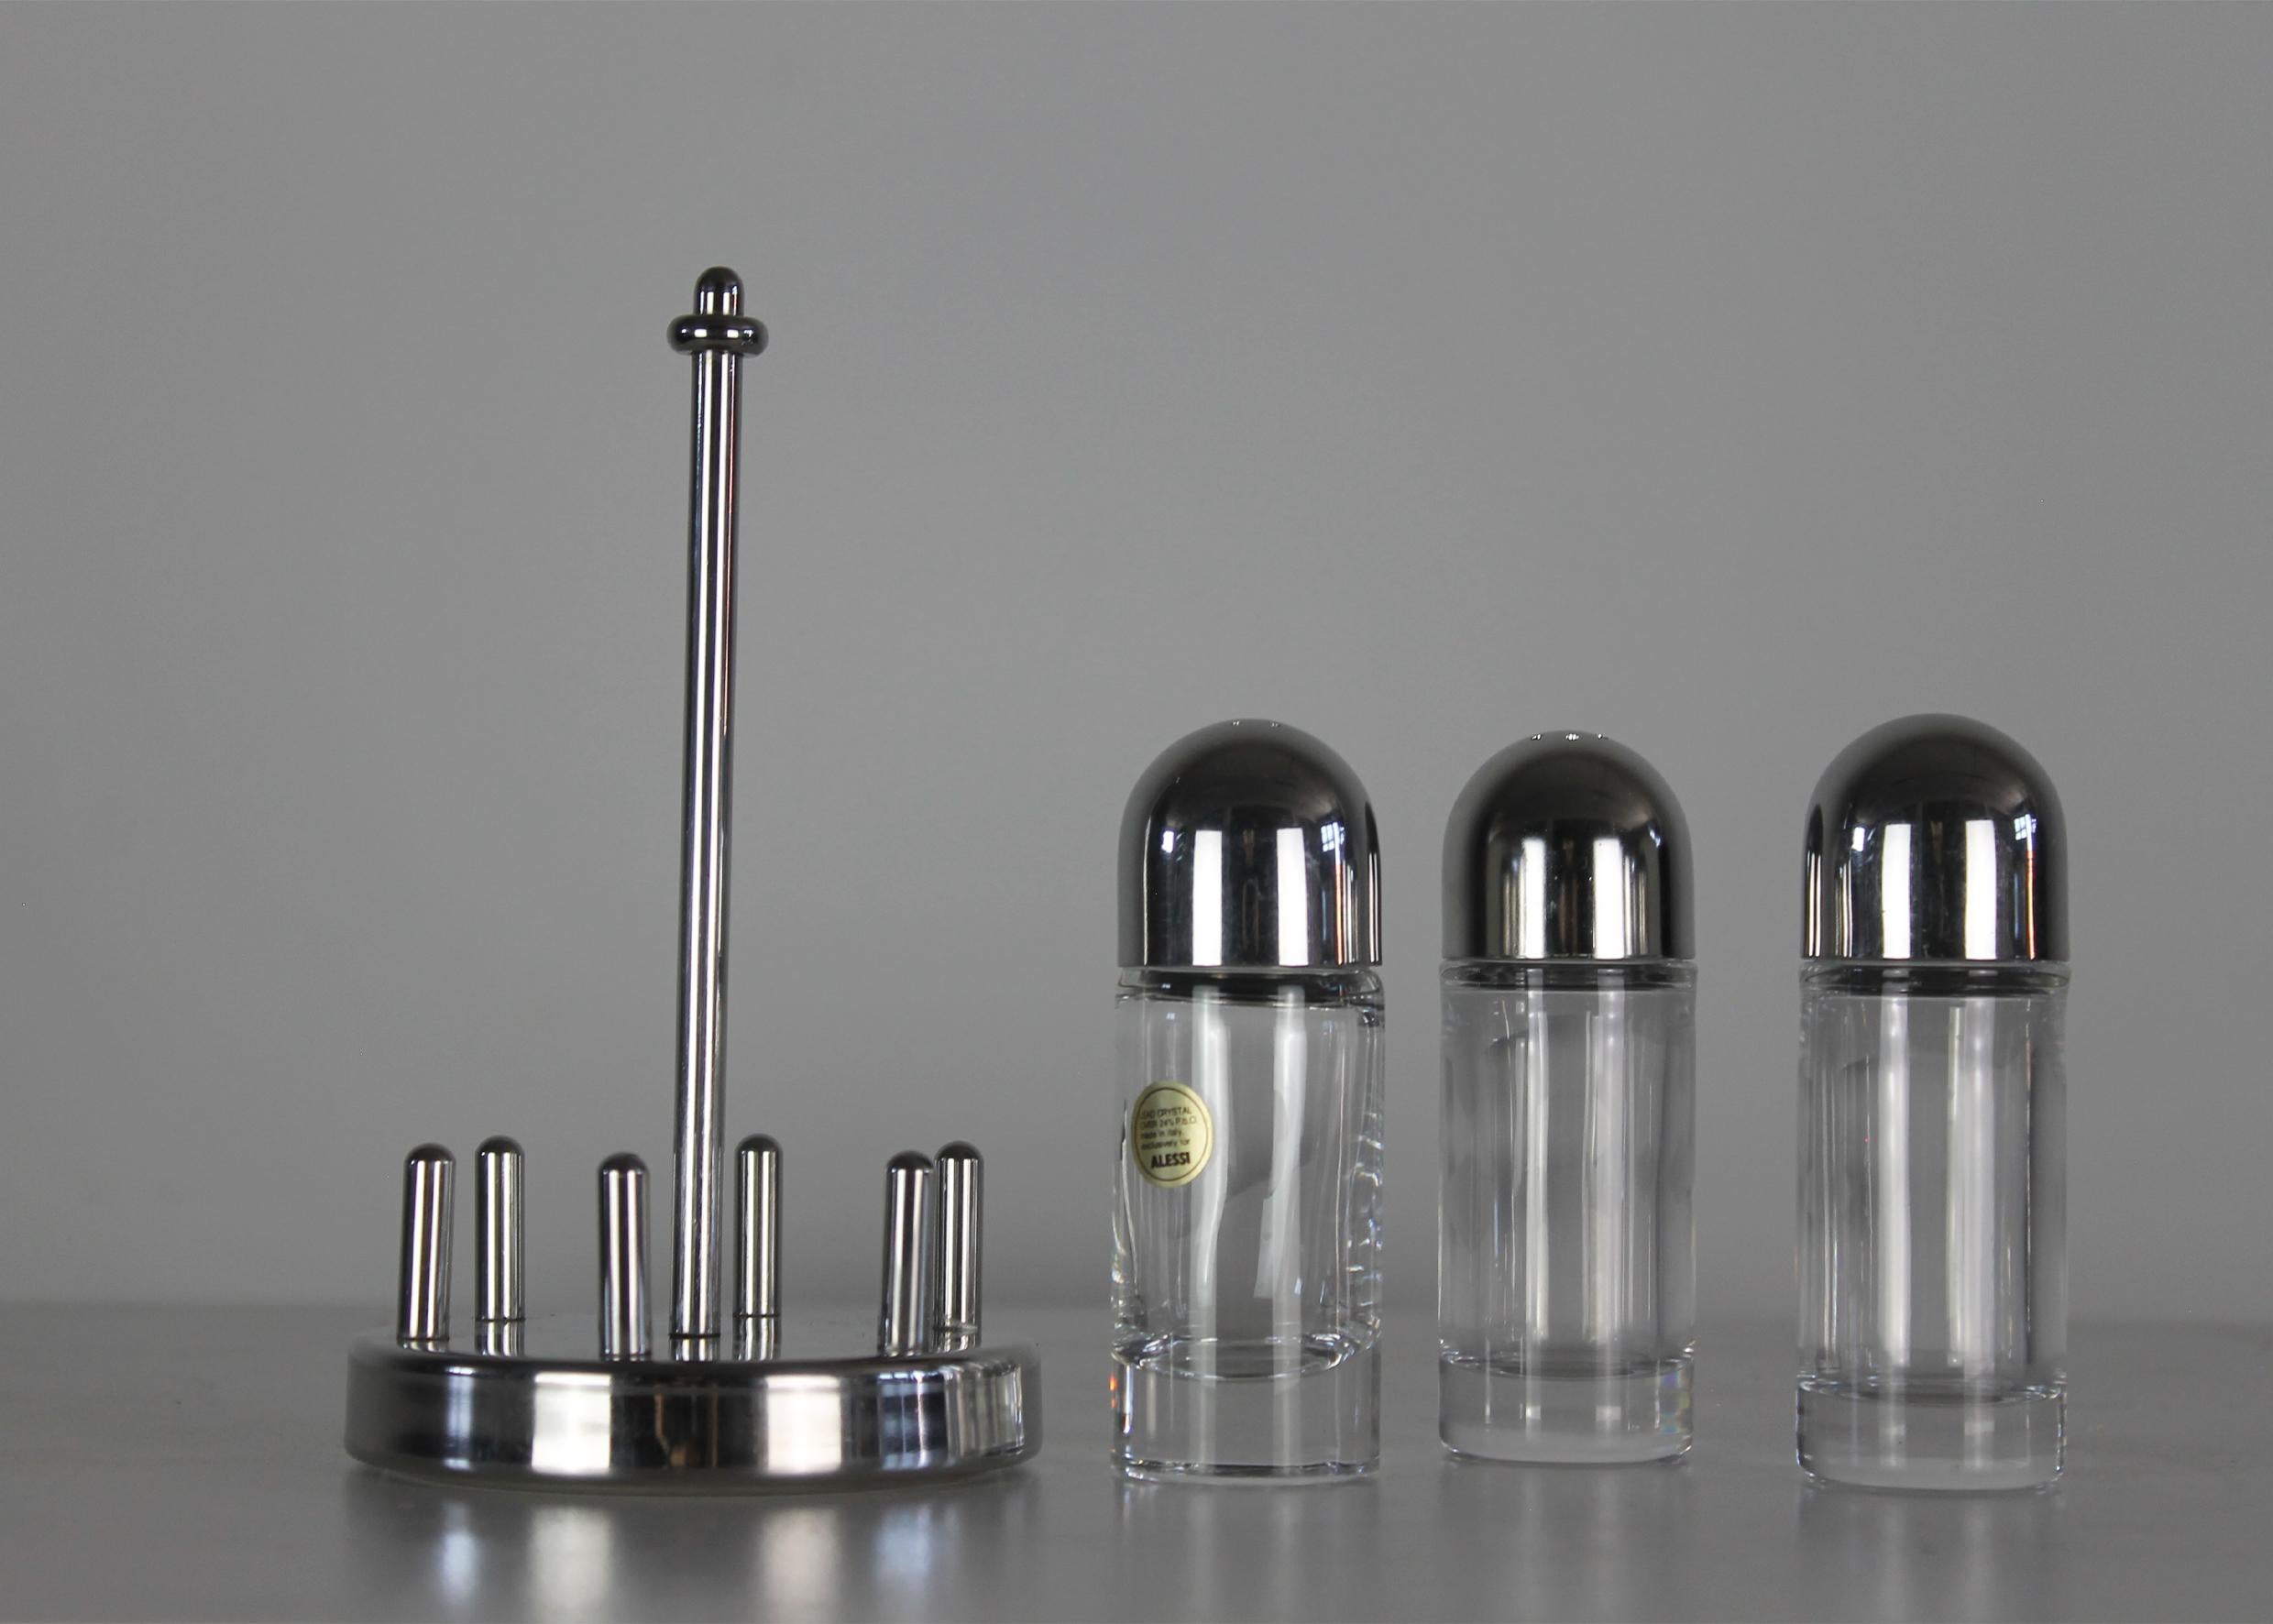 Other Ettore Sottsass Cruet Set in Stainless Steel and Glass by Alessi 1978 Italy